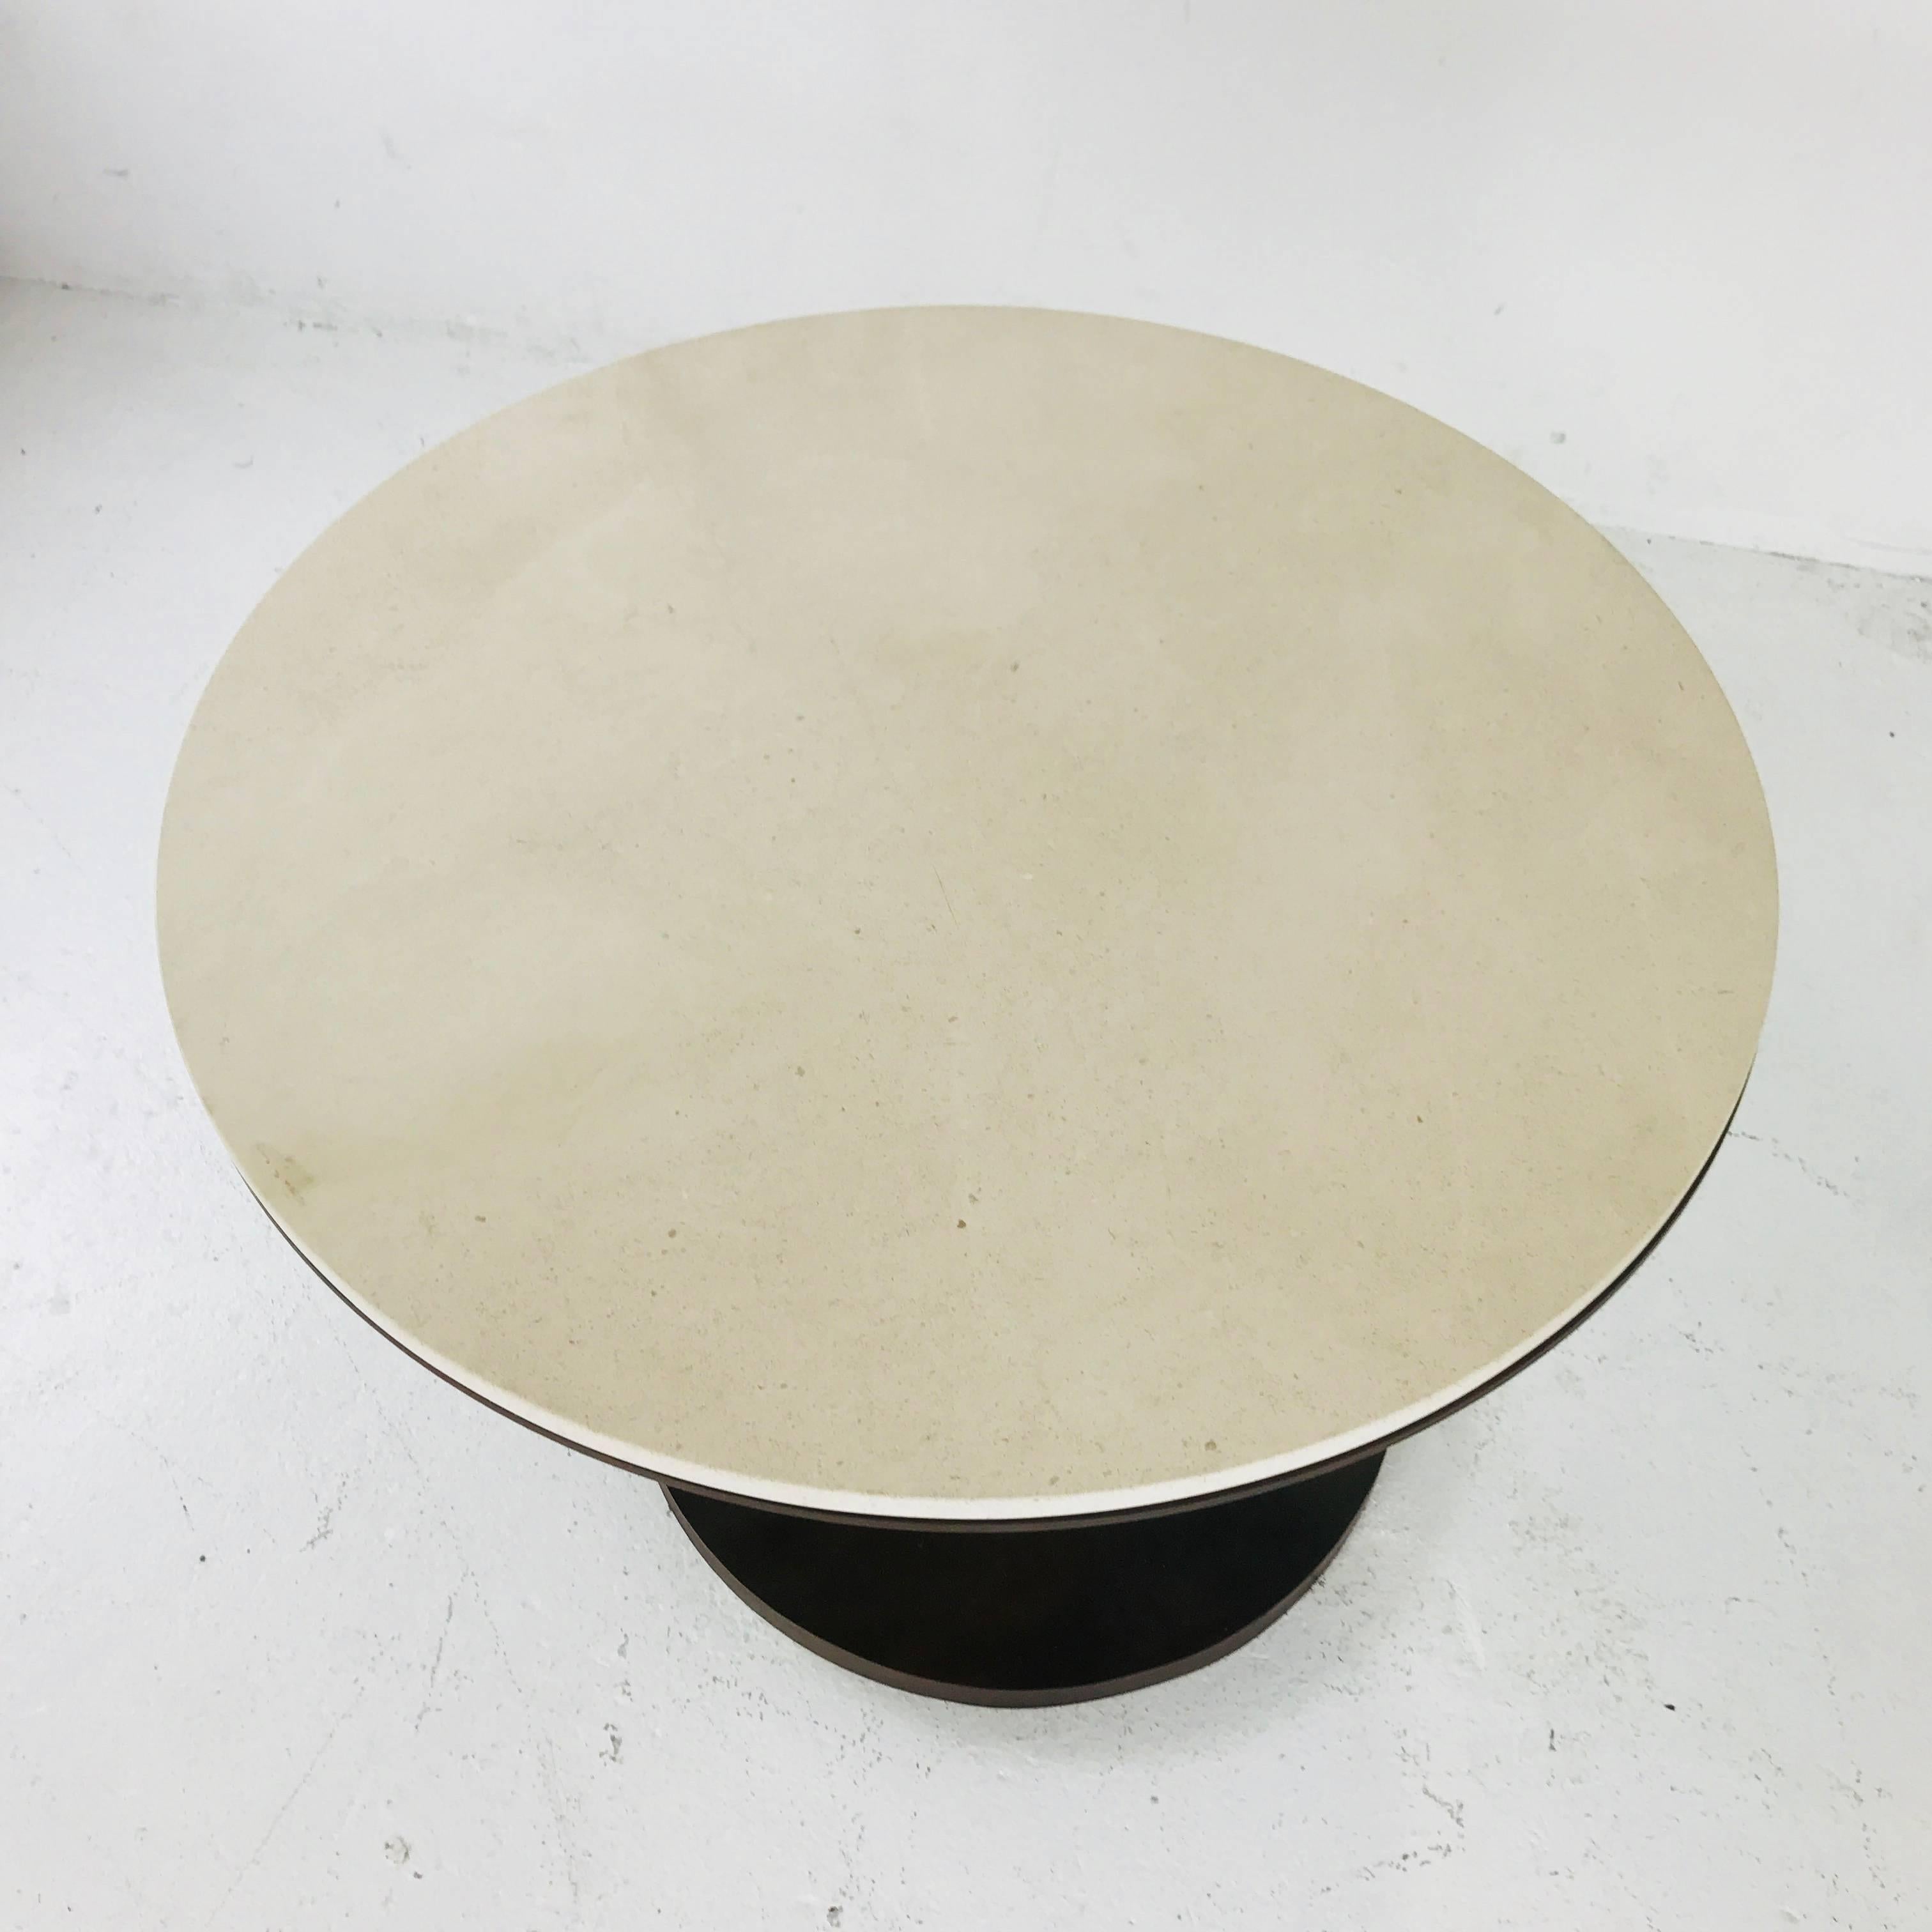 Metalwork Limestone Top Vine Occasional Table with Oxidized Finish